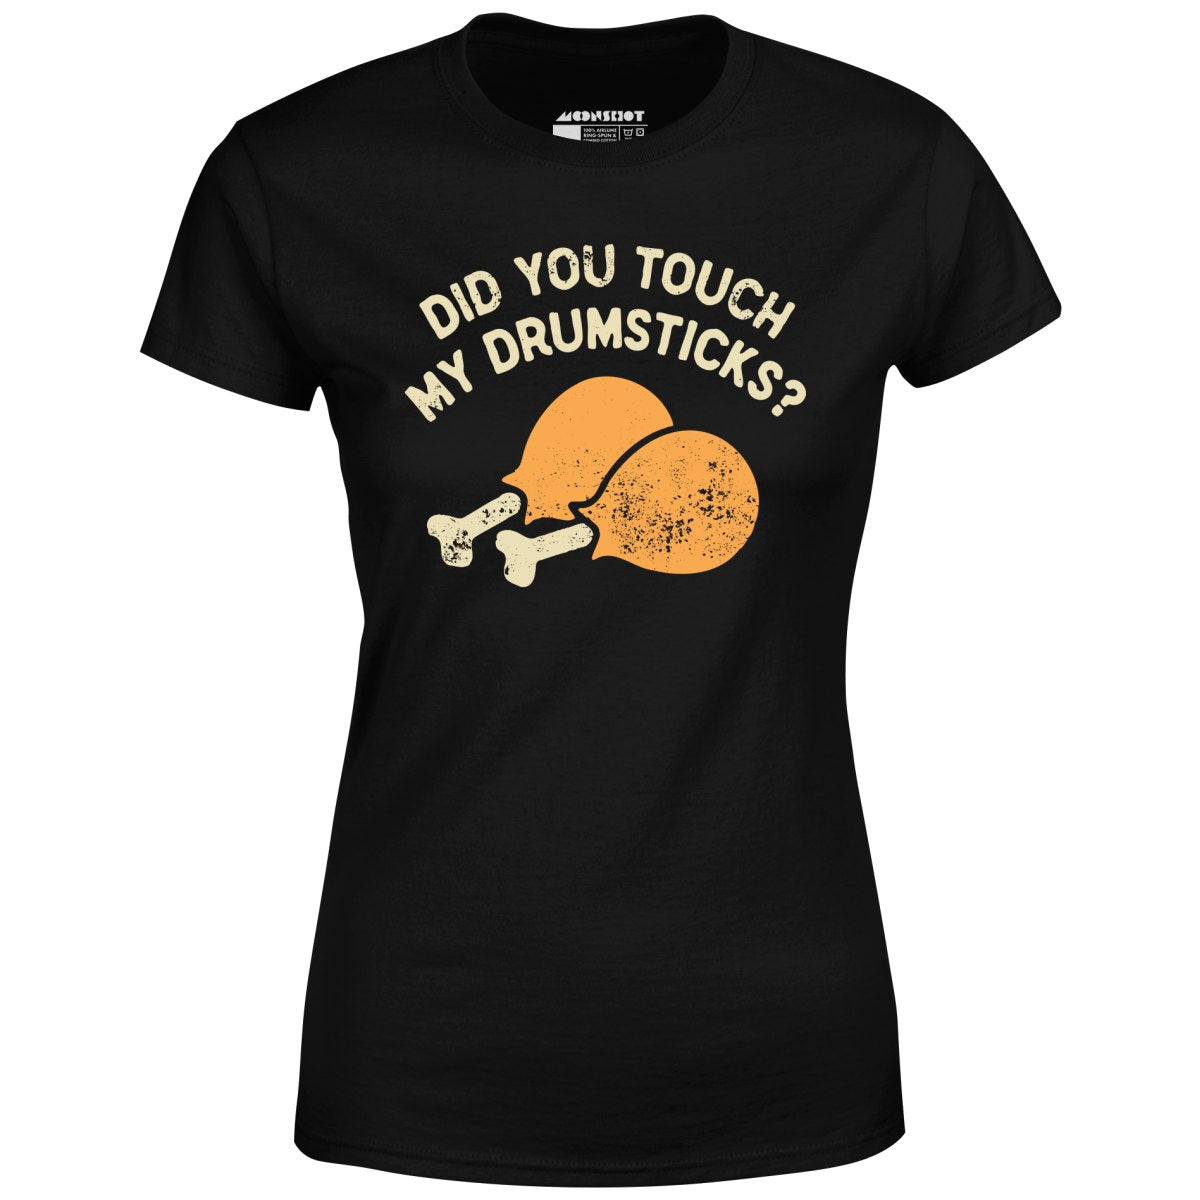 Did You Touch My Drumsticks? - Women's T-Shirt